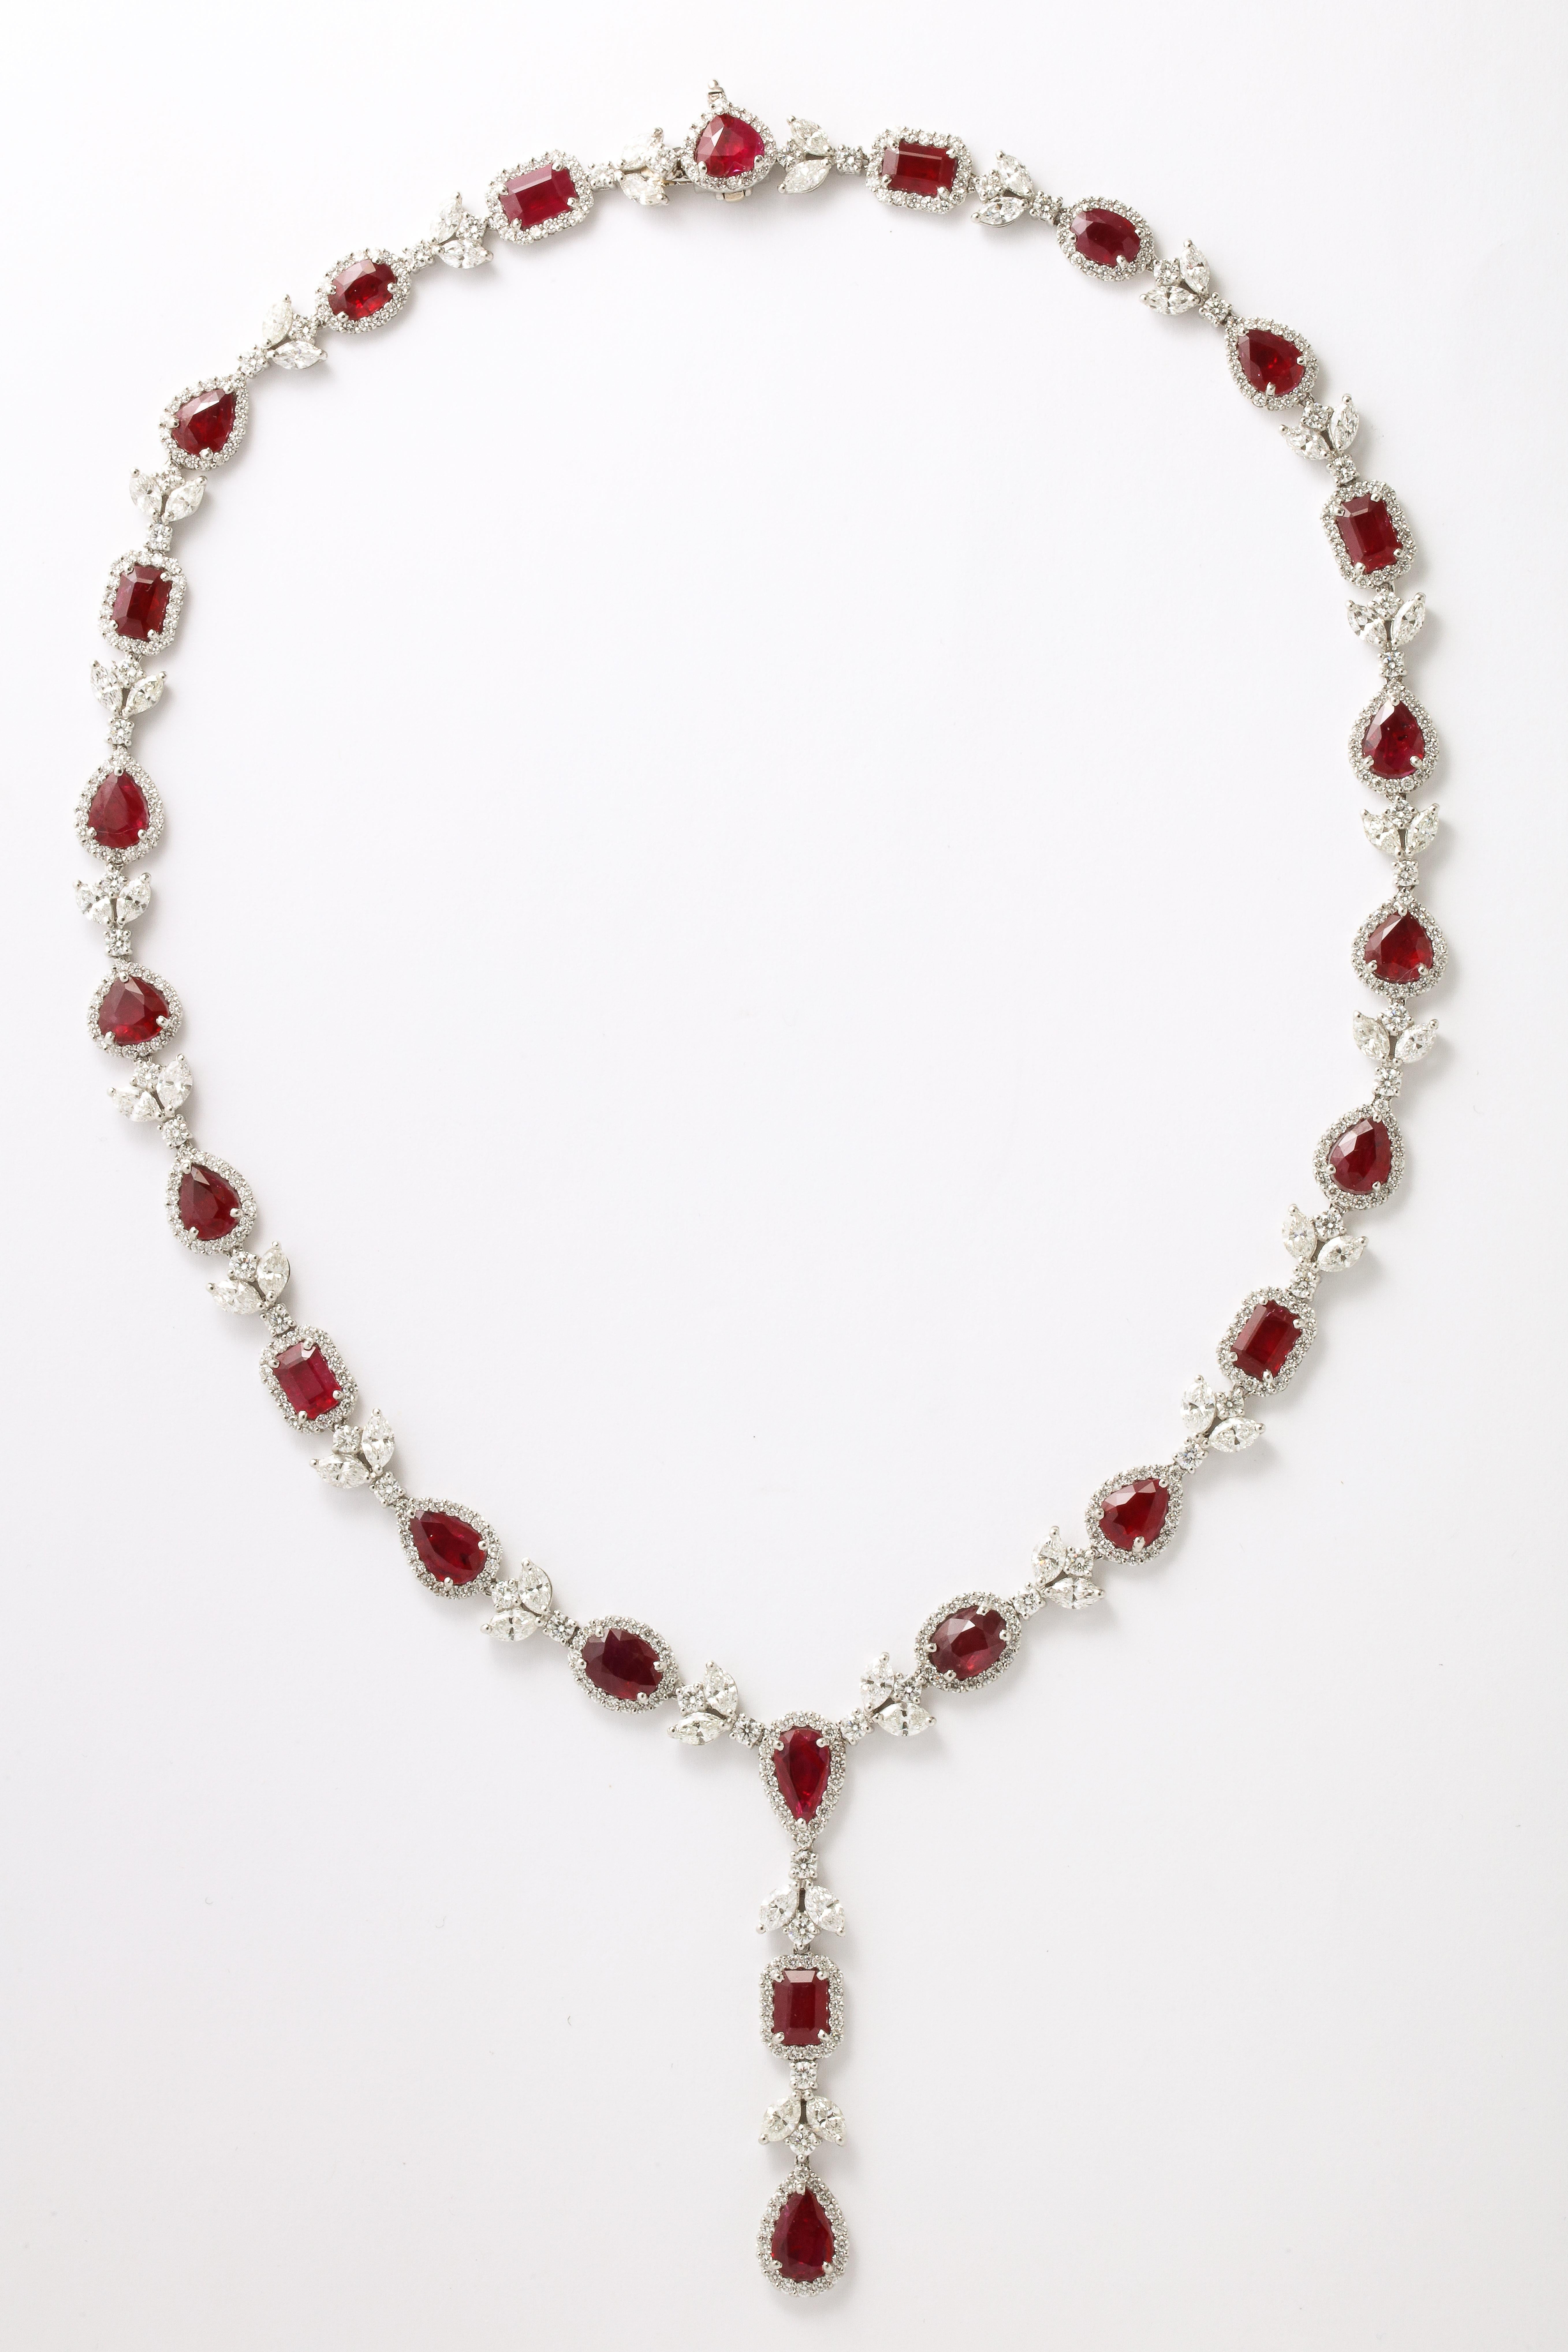 
A Stunning Multishape Ruby and Diamond Necklace. 

28.36 carats of pear, oval, emerald cut and heart shaped Ruby. 

19.12 carats of white marquise and round brilliant cut diamonds. 

Set in platinum. 

17 inch length with an approximate 2 inch drop